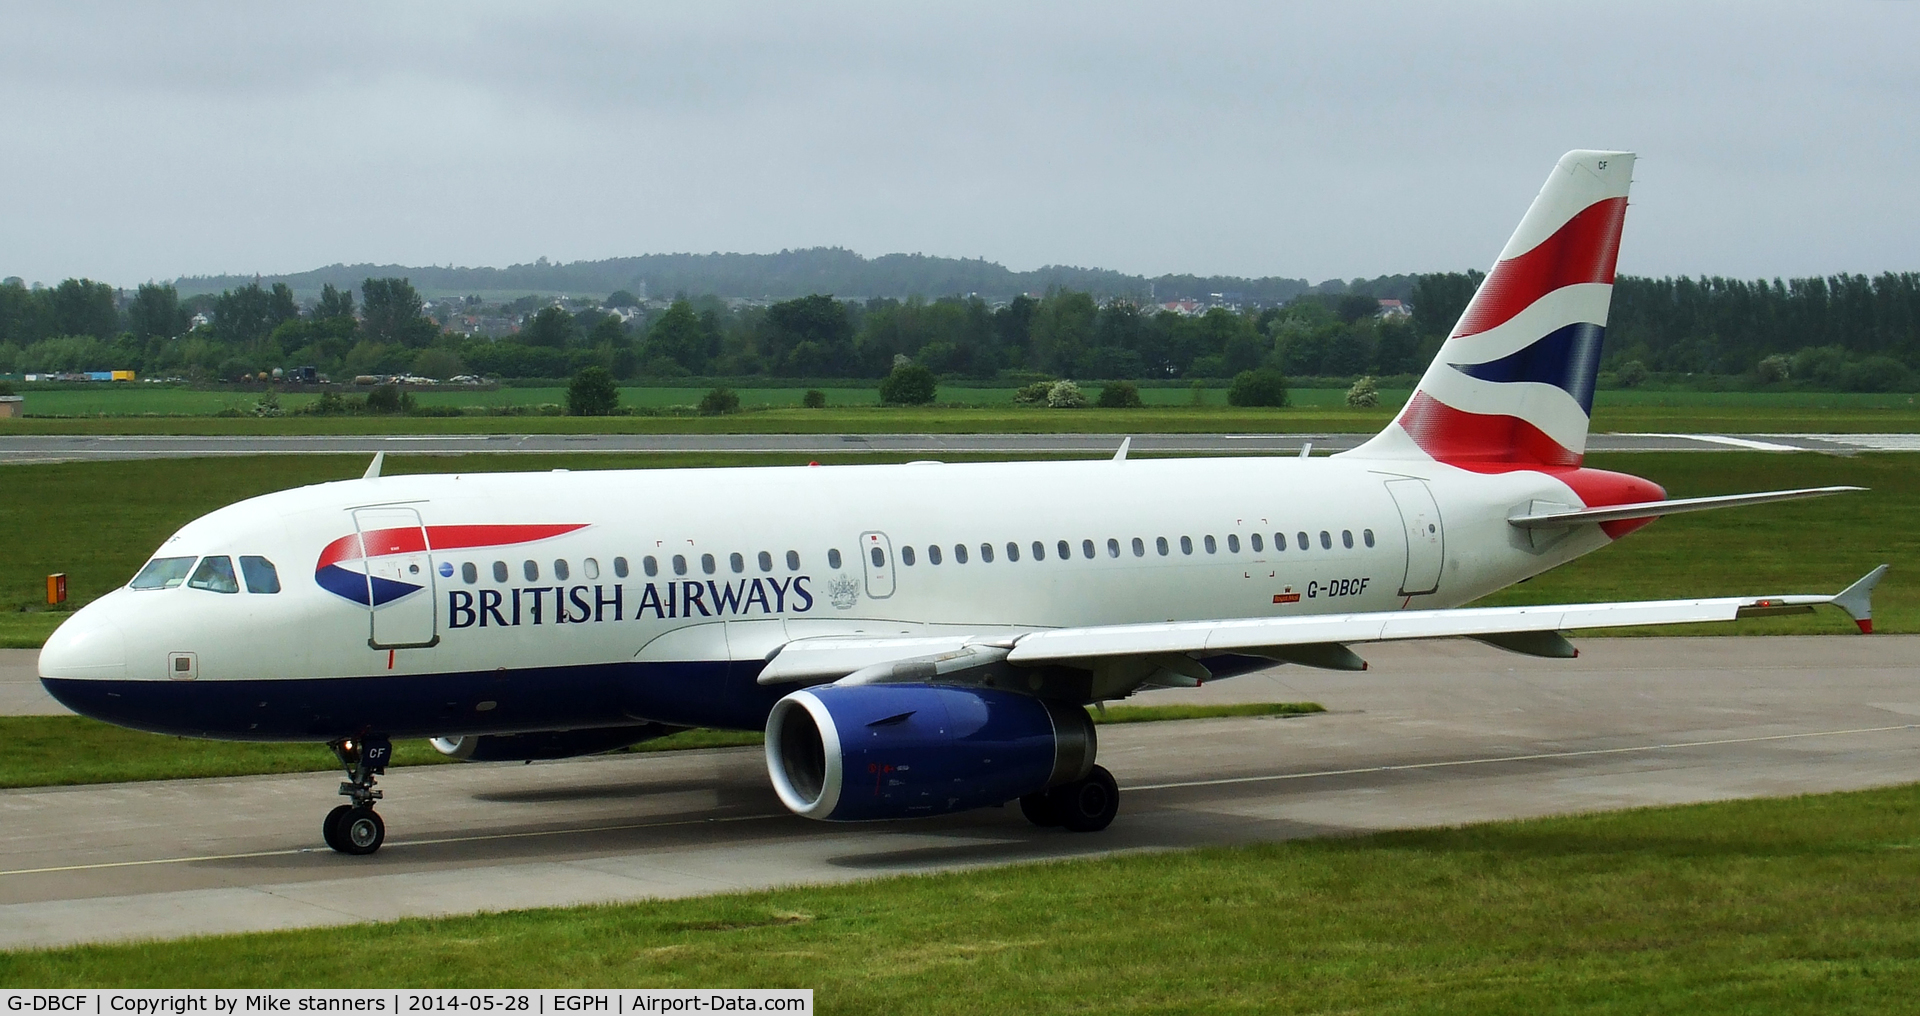 G-DBCF, 2005 Airbus A319-131 C/N 2466, British Airways A319- 131 taxiing to runway 06 for departure to LGW